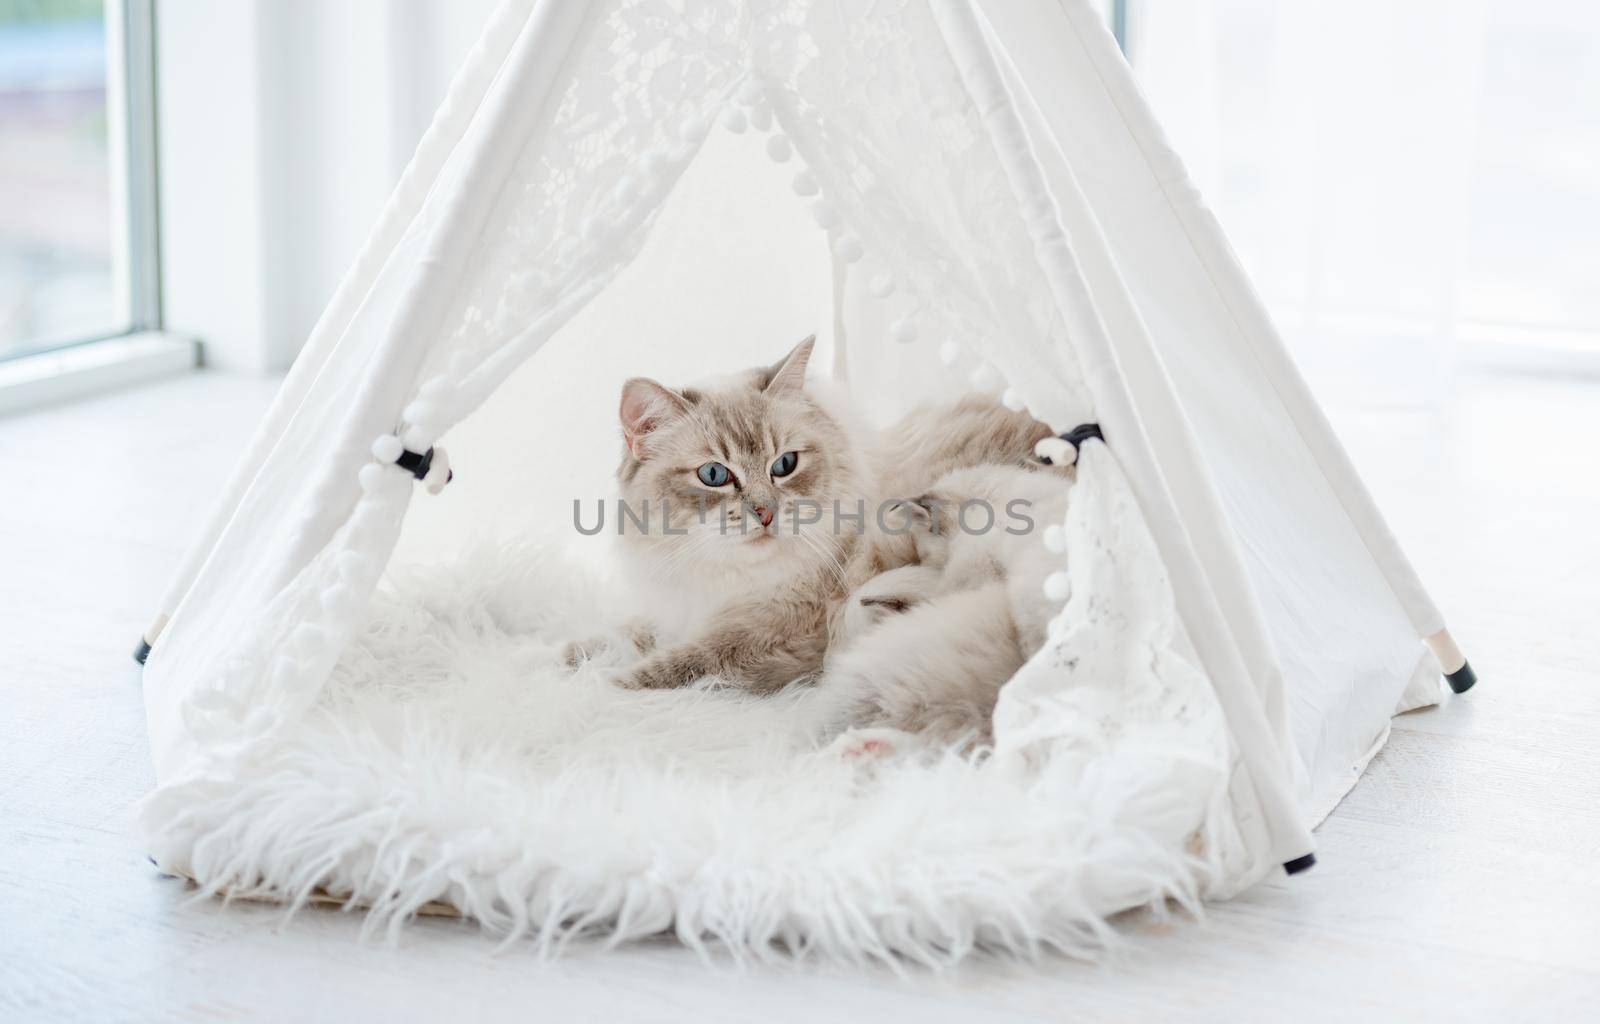 Ragdol cat mother with beautiful blue eyes lying with her sleeping kittens inside white curtain tent on fur close to window. Adorable purebred feline family with kitty